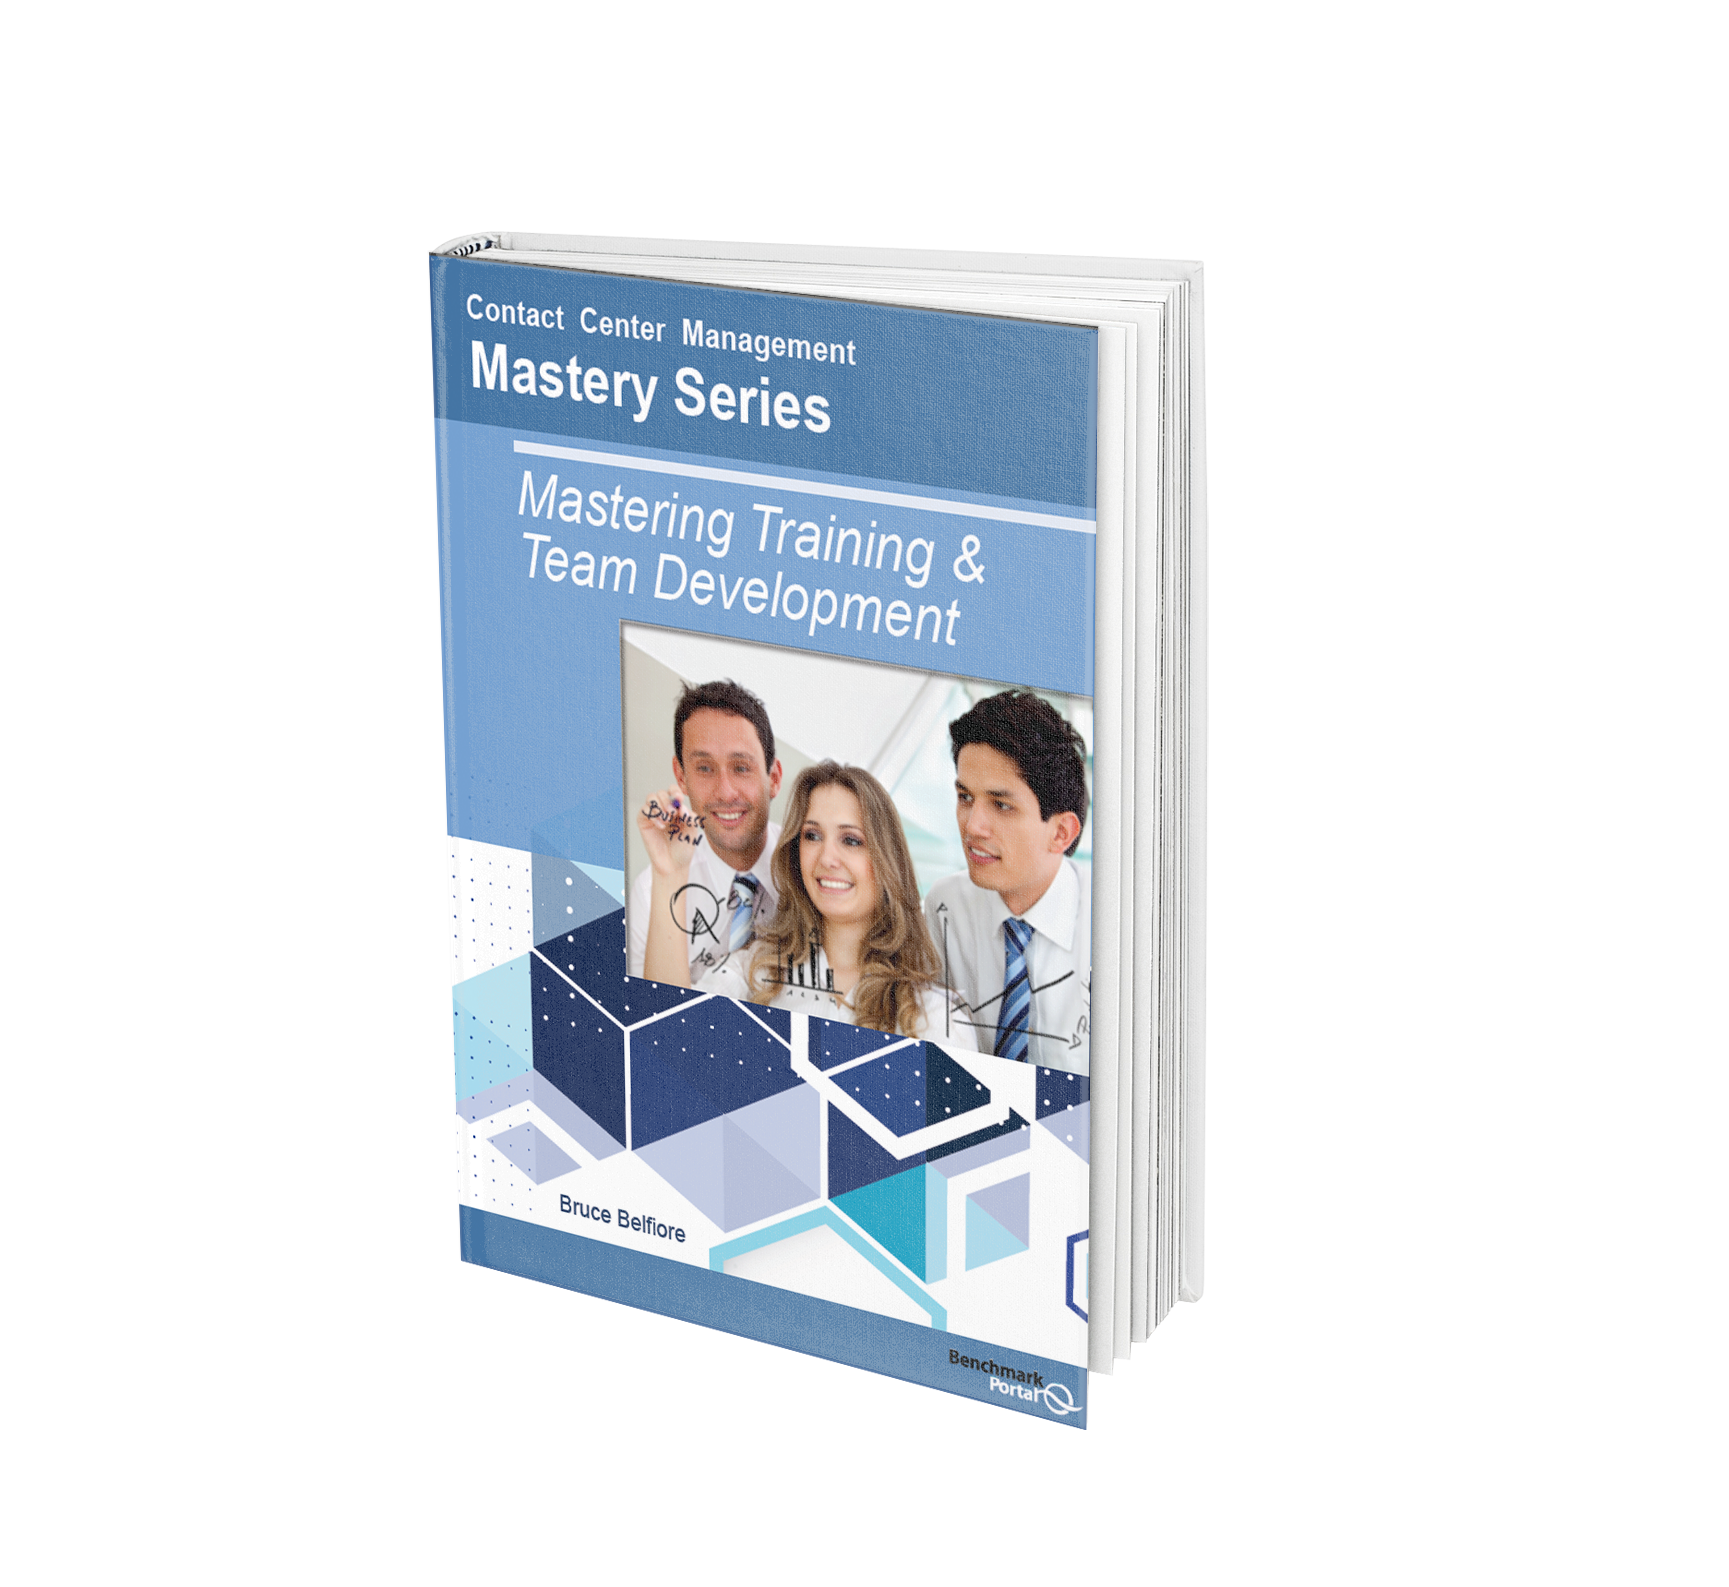 Call Center Training and Team Development Free Download